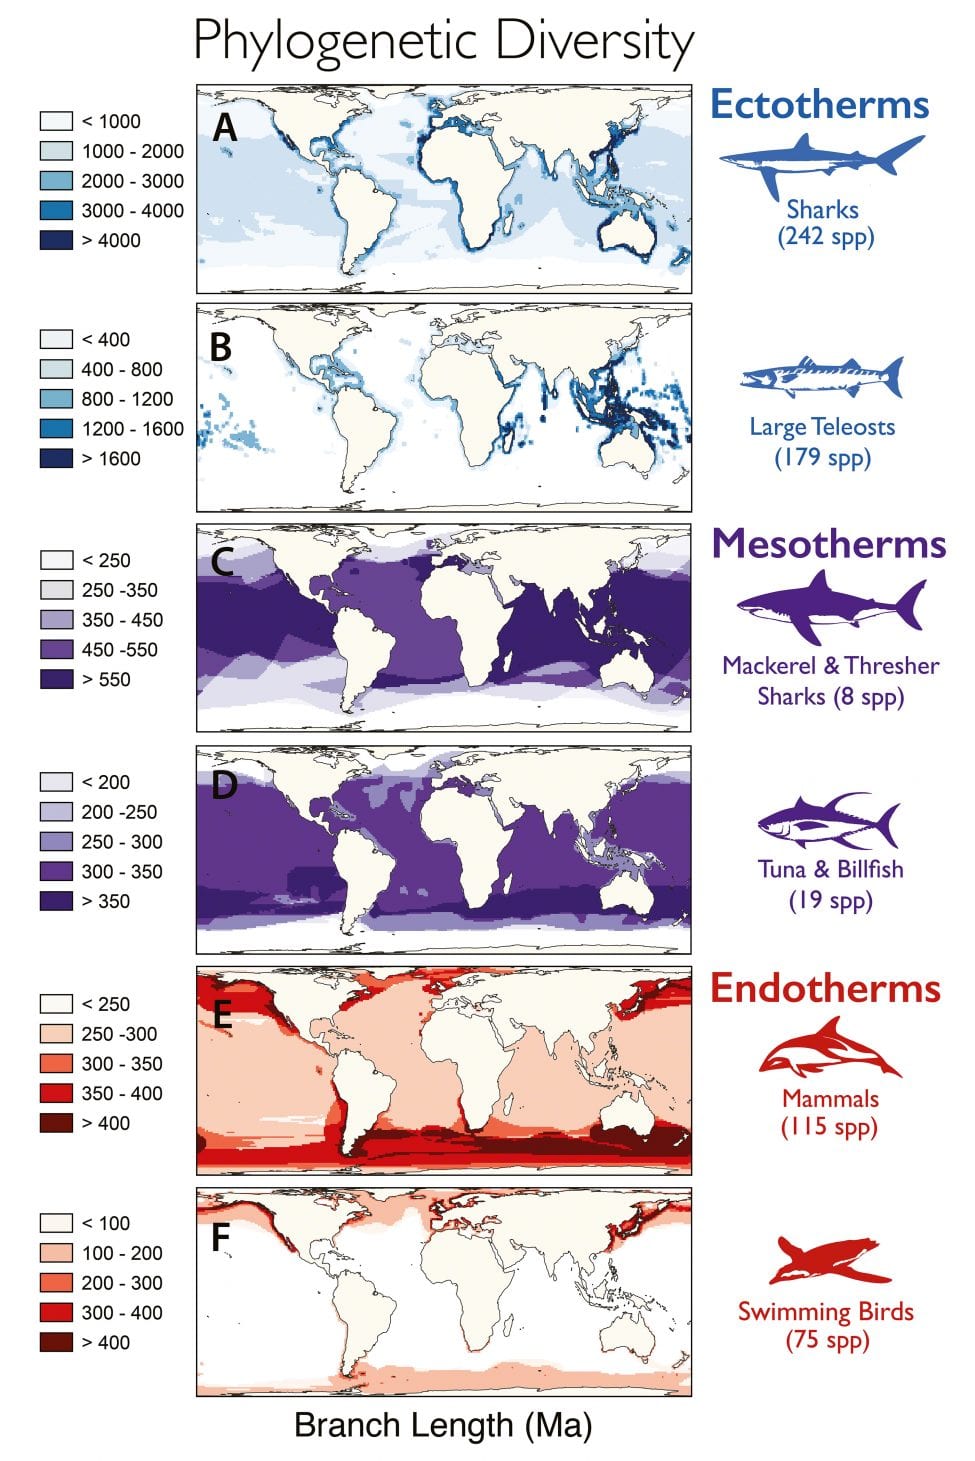 Phylogenetic diversity, expressed as the sum of evolutionary times of divergence [in millions of years (Ma)] between co-occurring species, is largely tropical or subtropical for ectothermic sharks and teleost fish, cosmopolitan for mesotherms (excluding poles), and peaks in cold, temperate waters for endothermic mammals and birds. Spatial cells are 110 km × 110 km; cells lacking species are unshaded.<br />
<br />
From Grady JM, Maitner BS, Winter AS, Kaschner K, Tittensor DP, Record S, Smith FA, Wilson AM, Dell AI, Zarnetske PL and Wearing HJ. 2019. Metabolic asymmetry and the global diversity of marine predators. Science, 25 Jan 2019, Vol 363, Issue 6425, eaat4220, DOI: 10.1126/science.aat4220. Reprinted with permission from The American Association for the Advancement of Science (AAAS).